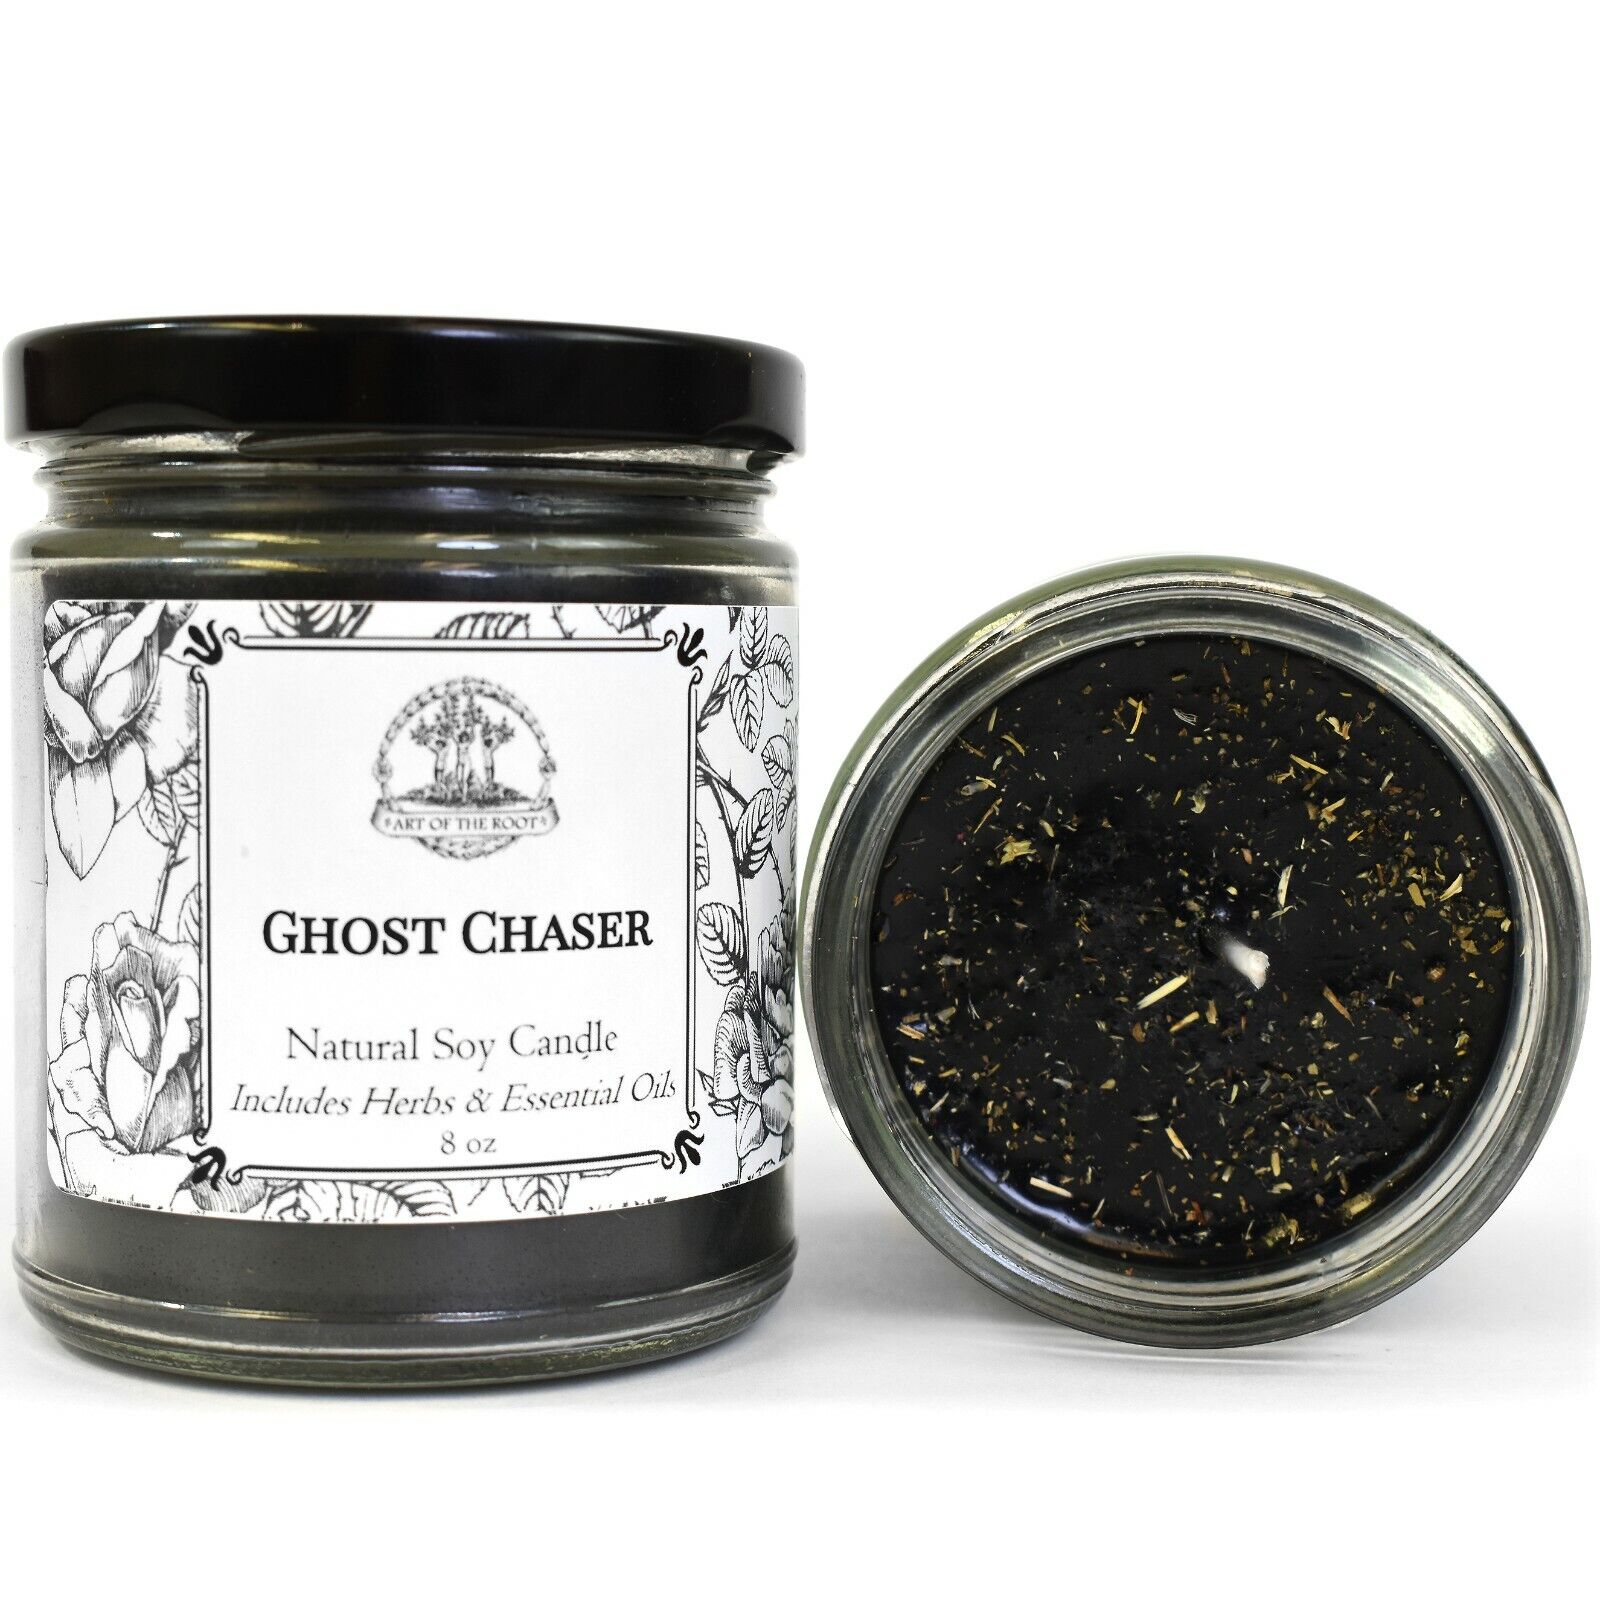 Ghost Chaser Soy Candle Negativity Hauntings Attacks Hoodoo Wicca Pagan Conjure